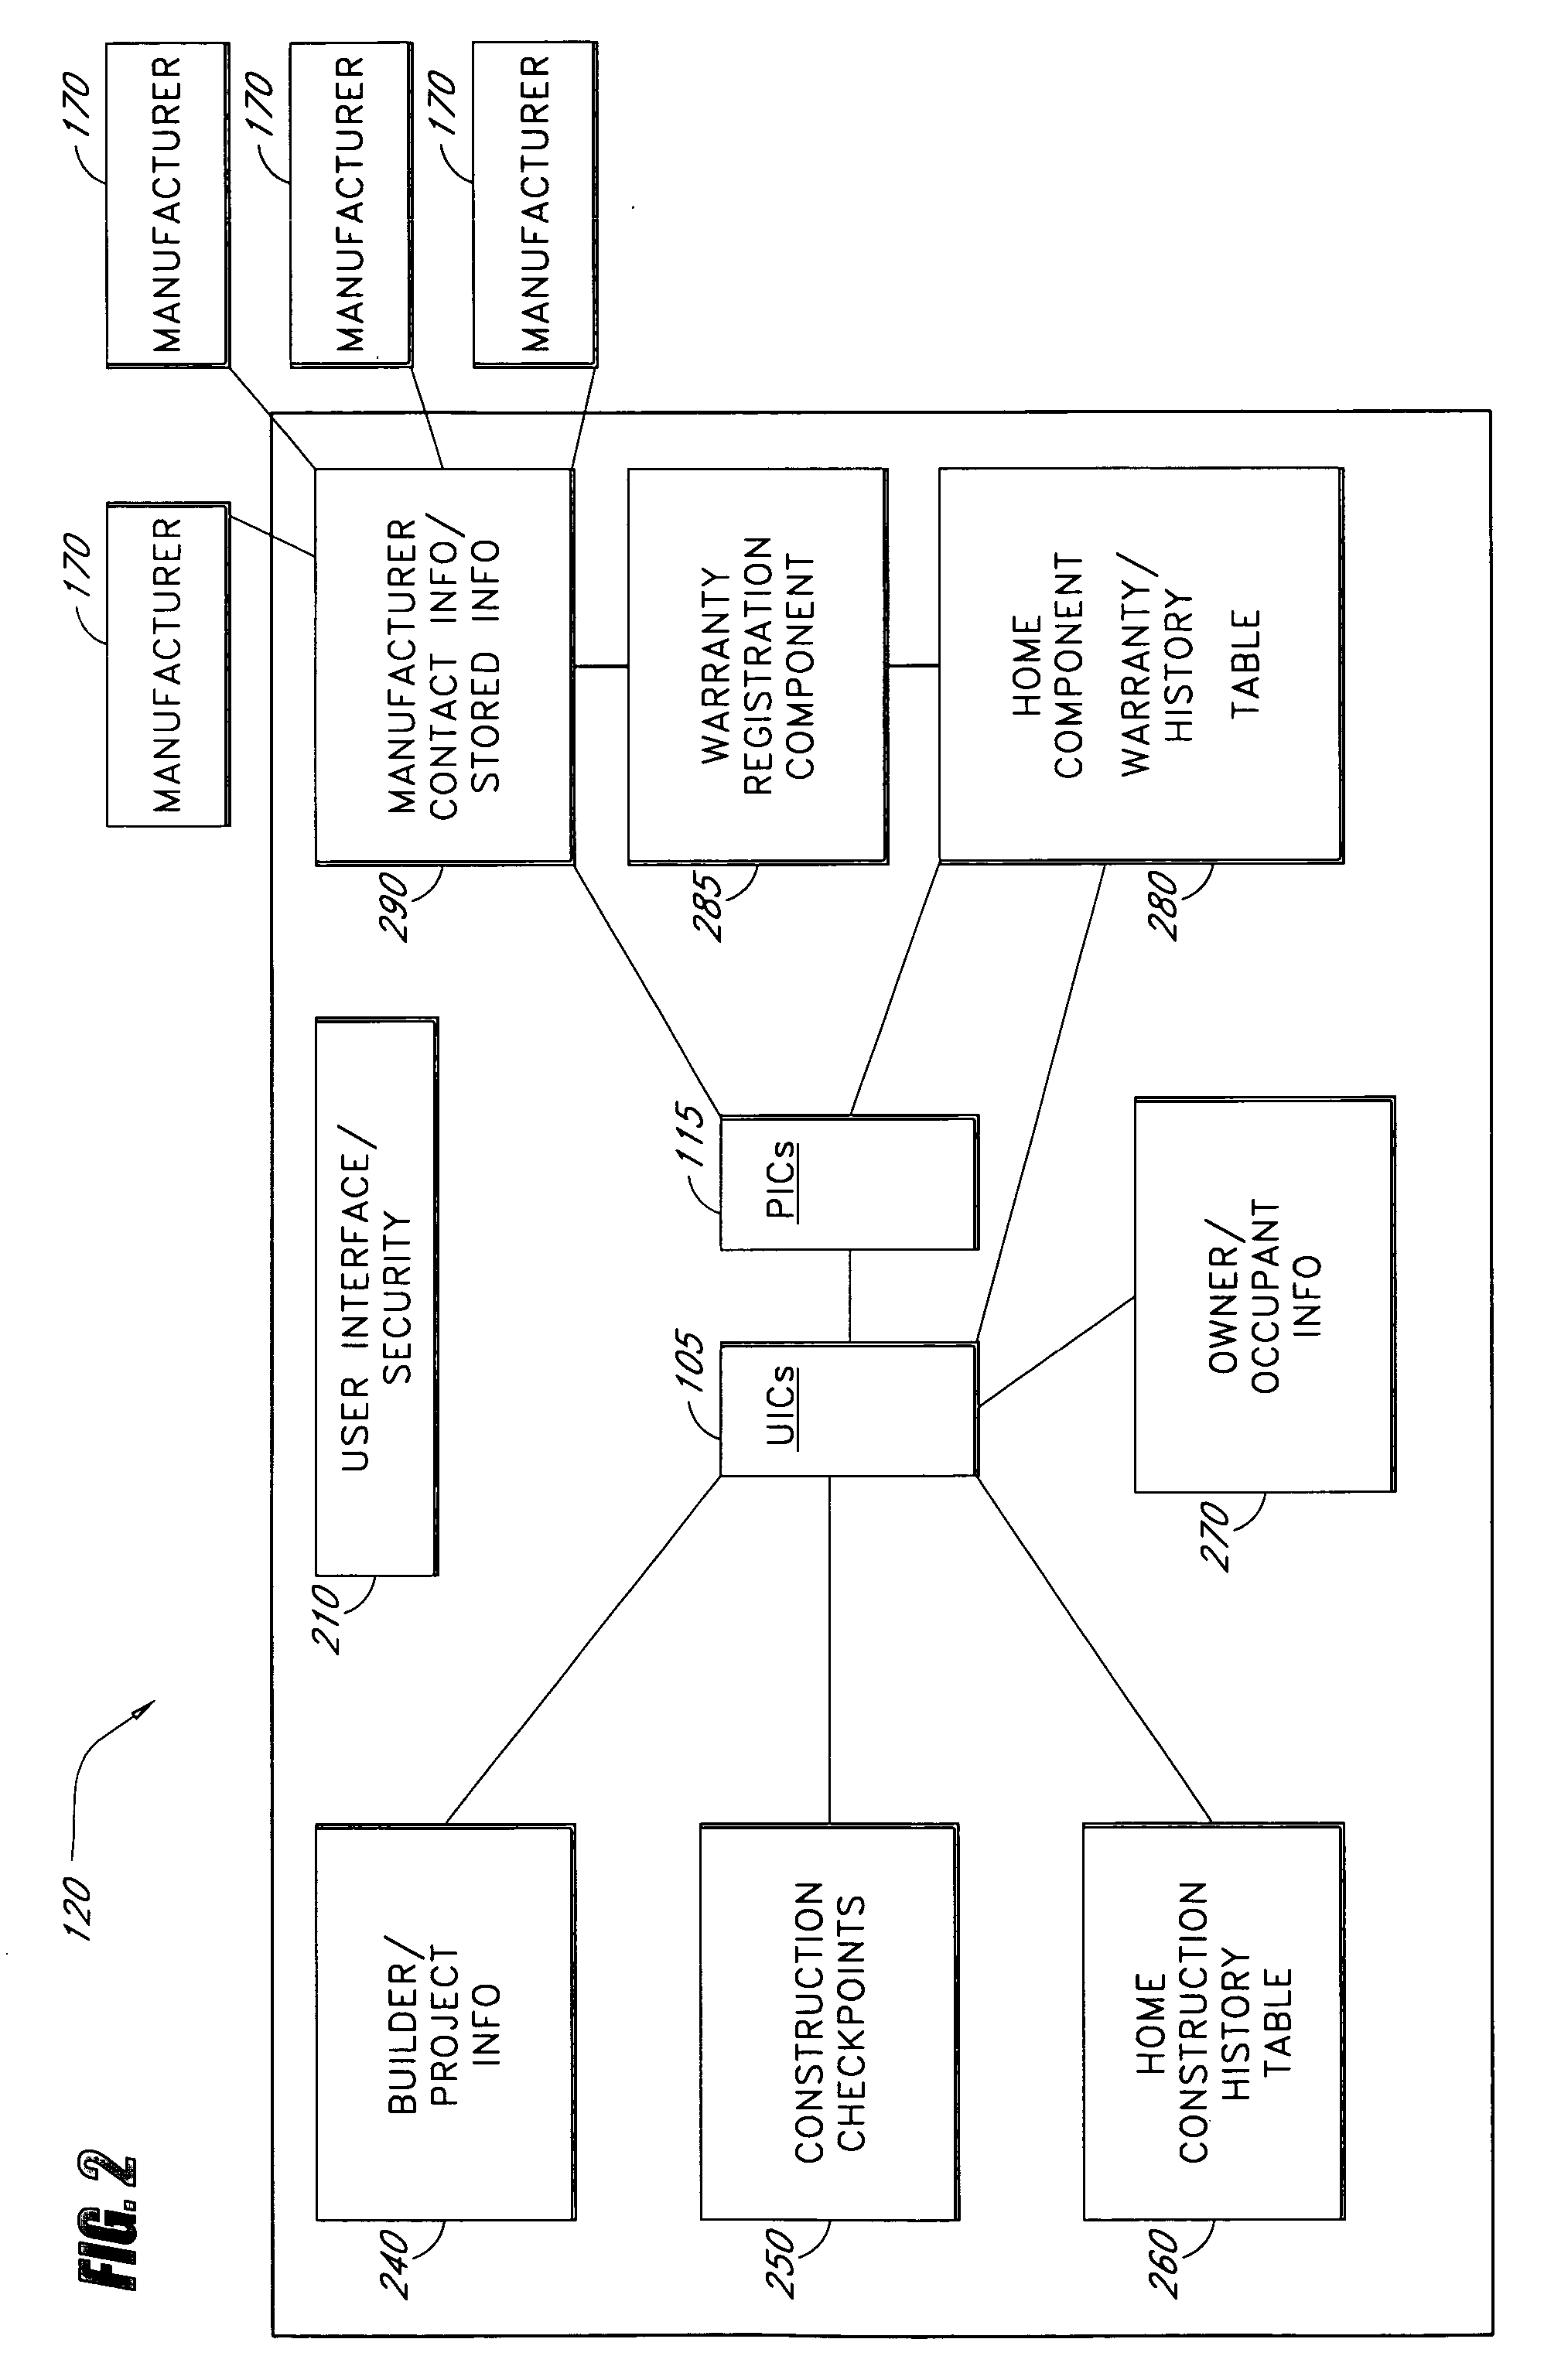 Systems and methods for tracking component-related information associated with buildings